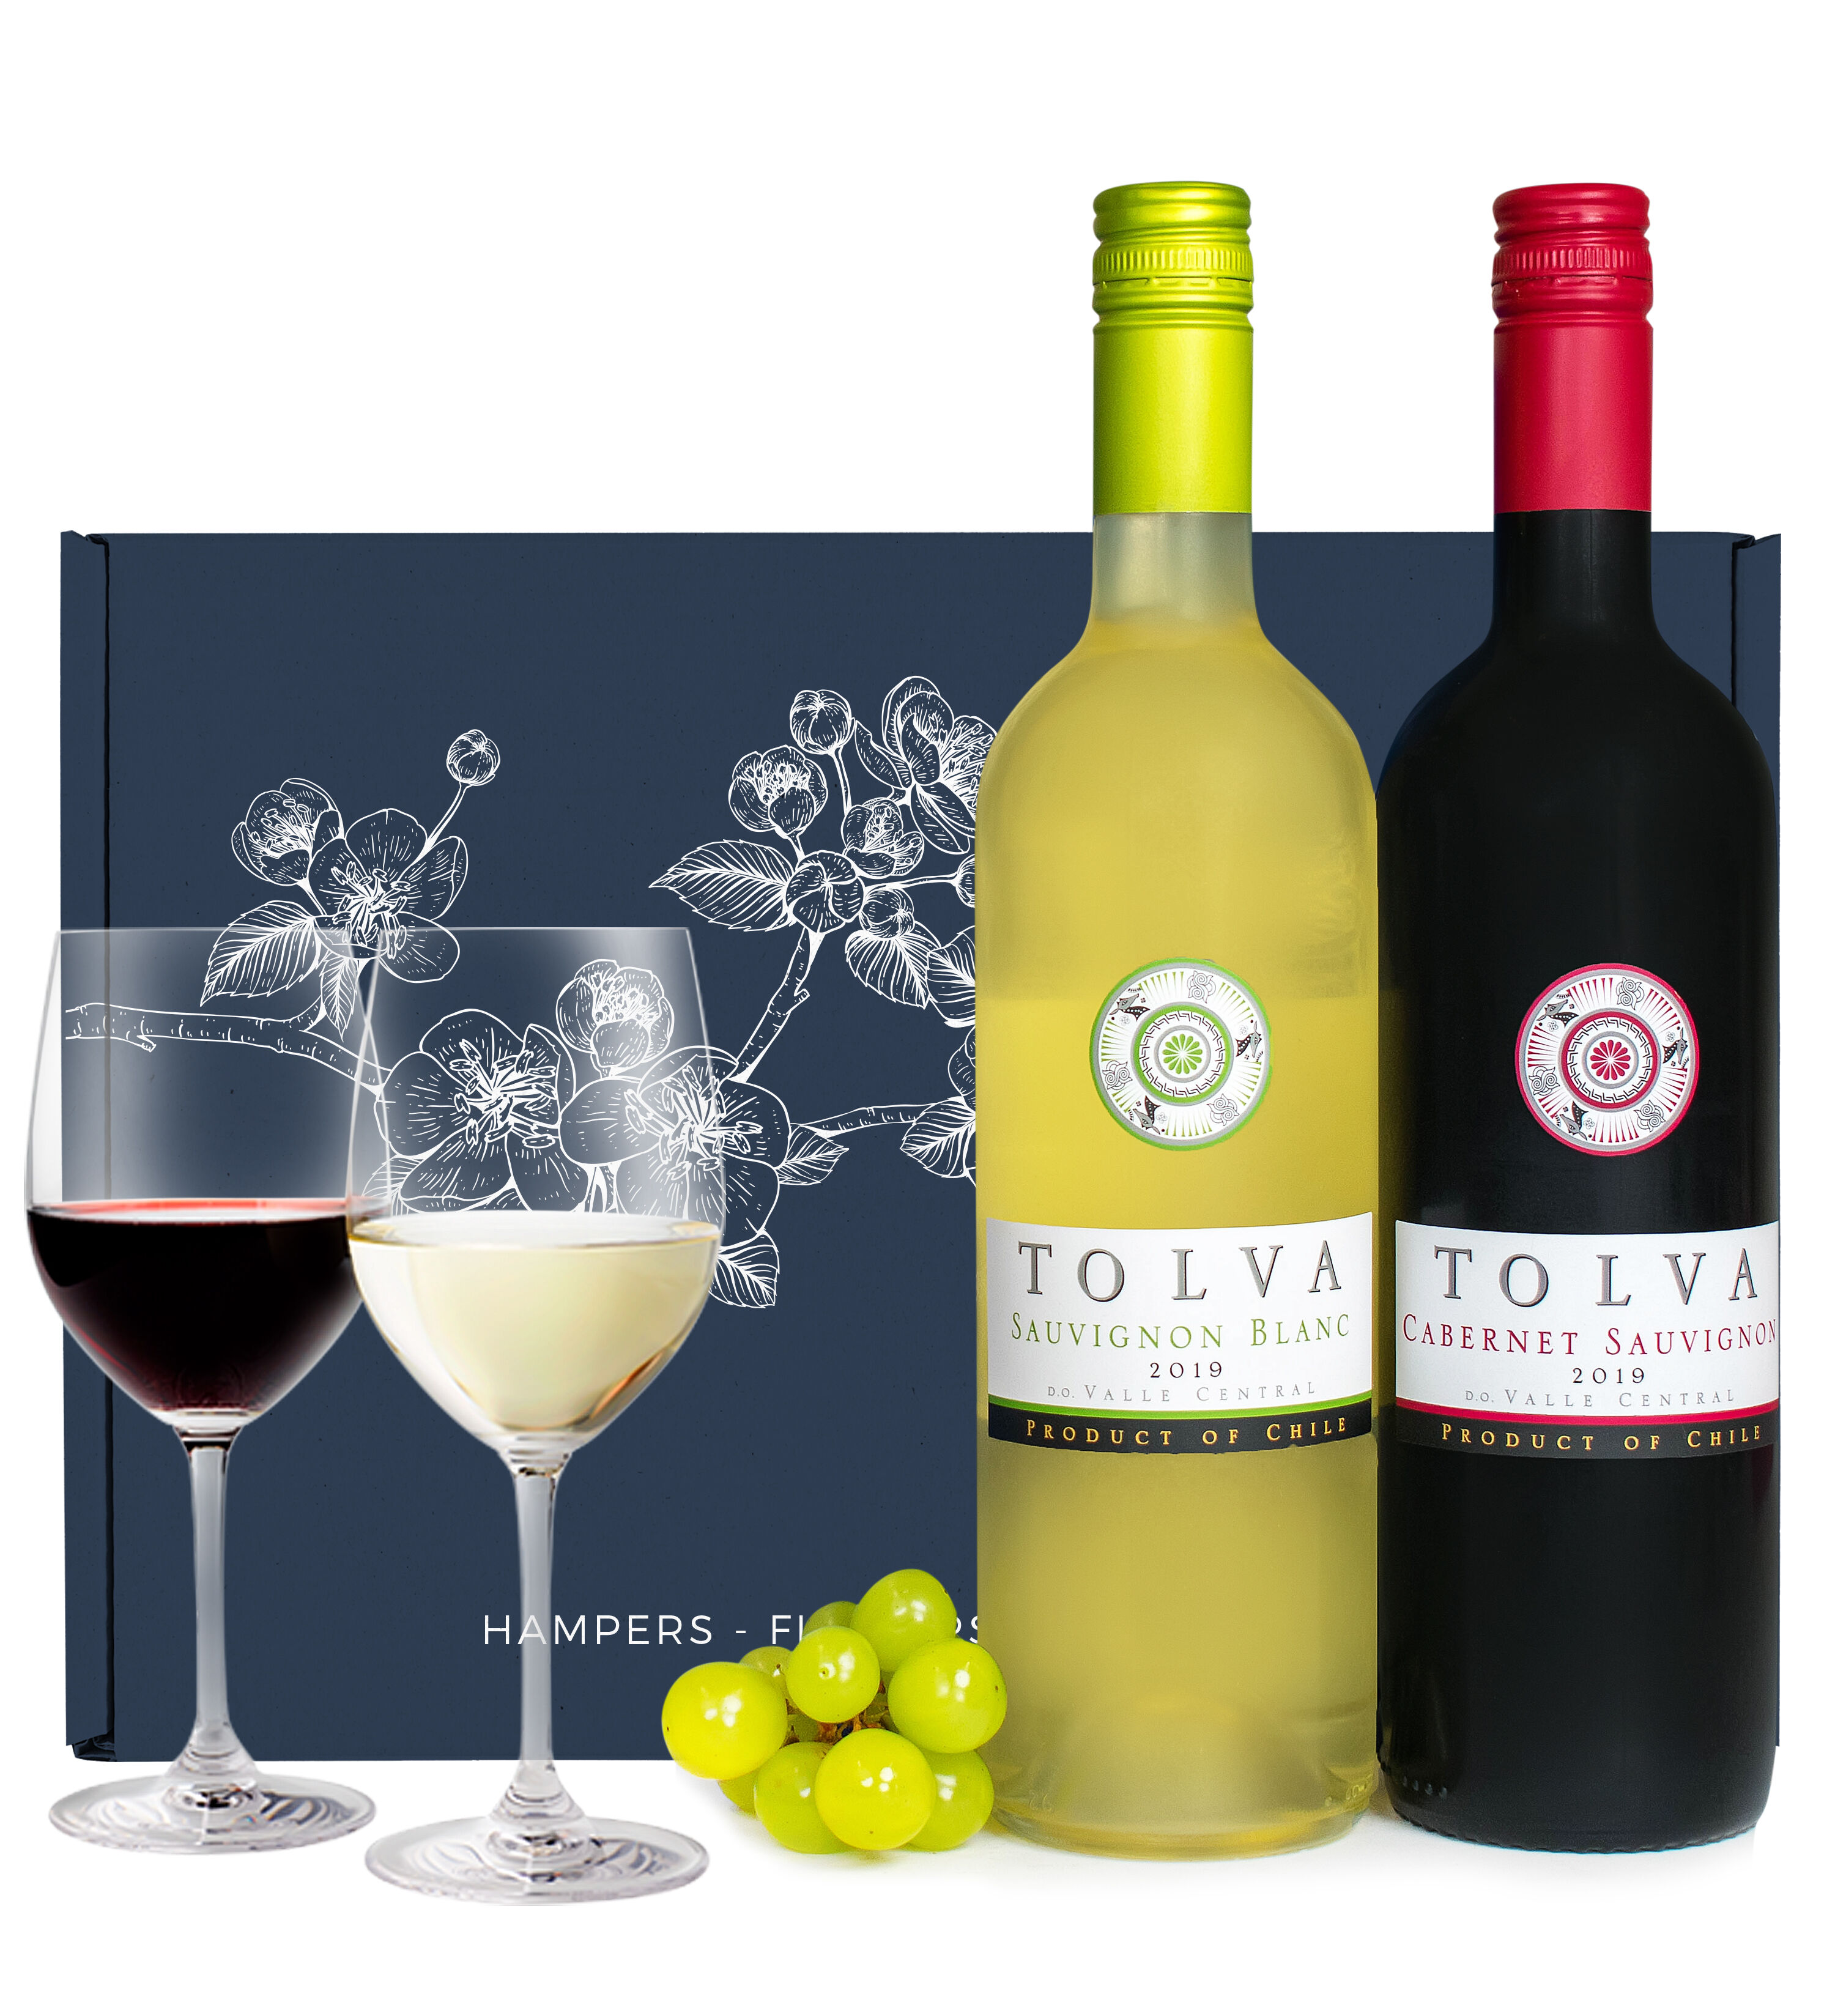 Chilean Wine Duo - Wine Gifts - Wine Gift Delivery - Wine Gift Sets - Wine Gifts UK - Wine Hampers - Wine Hamper Delivery